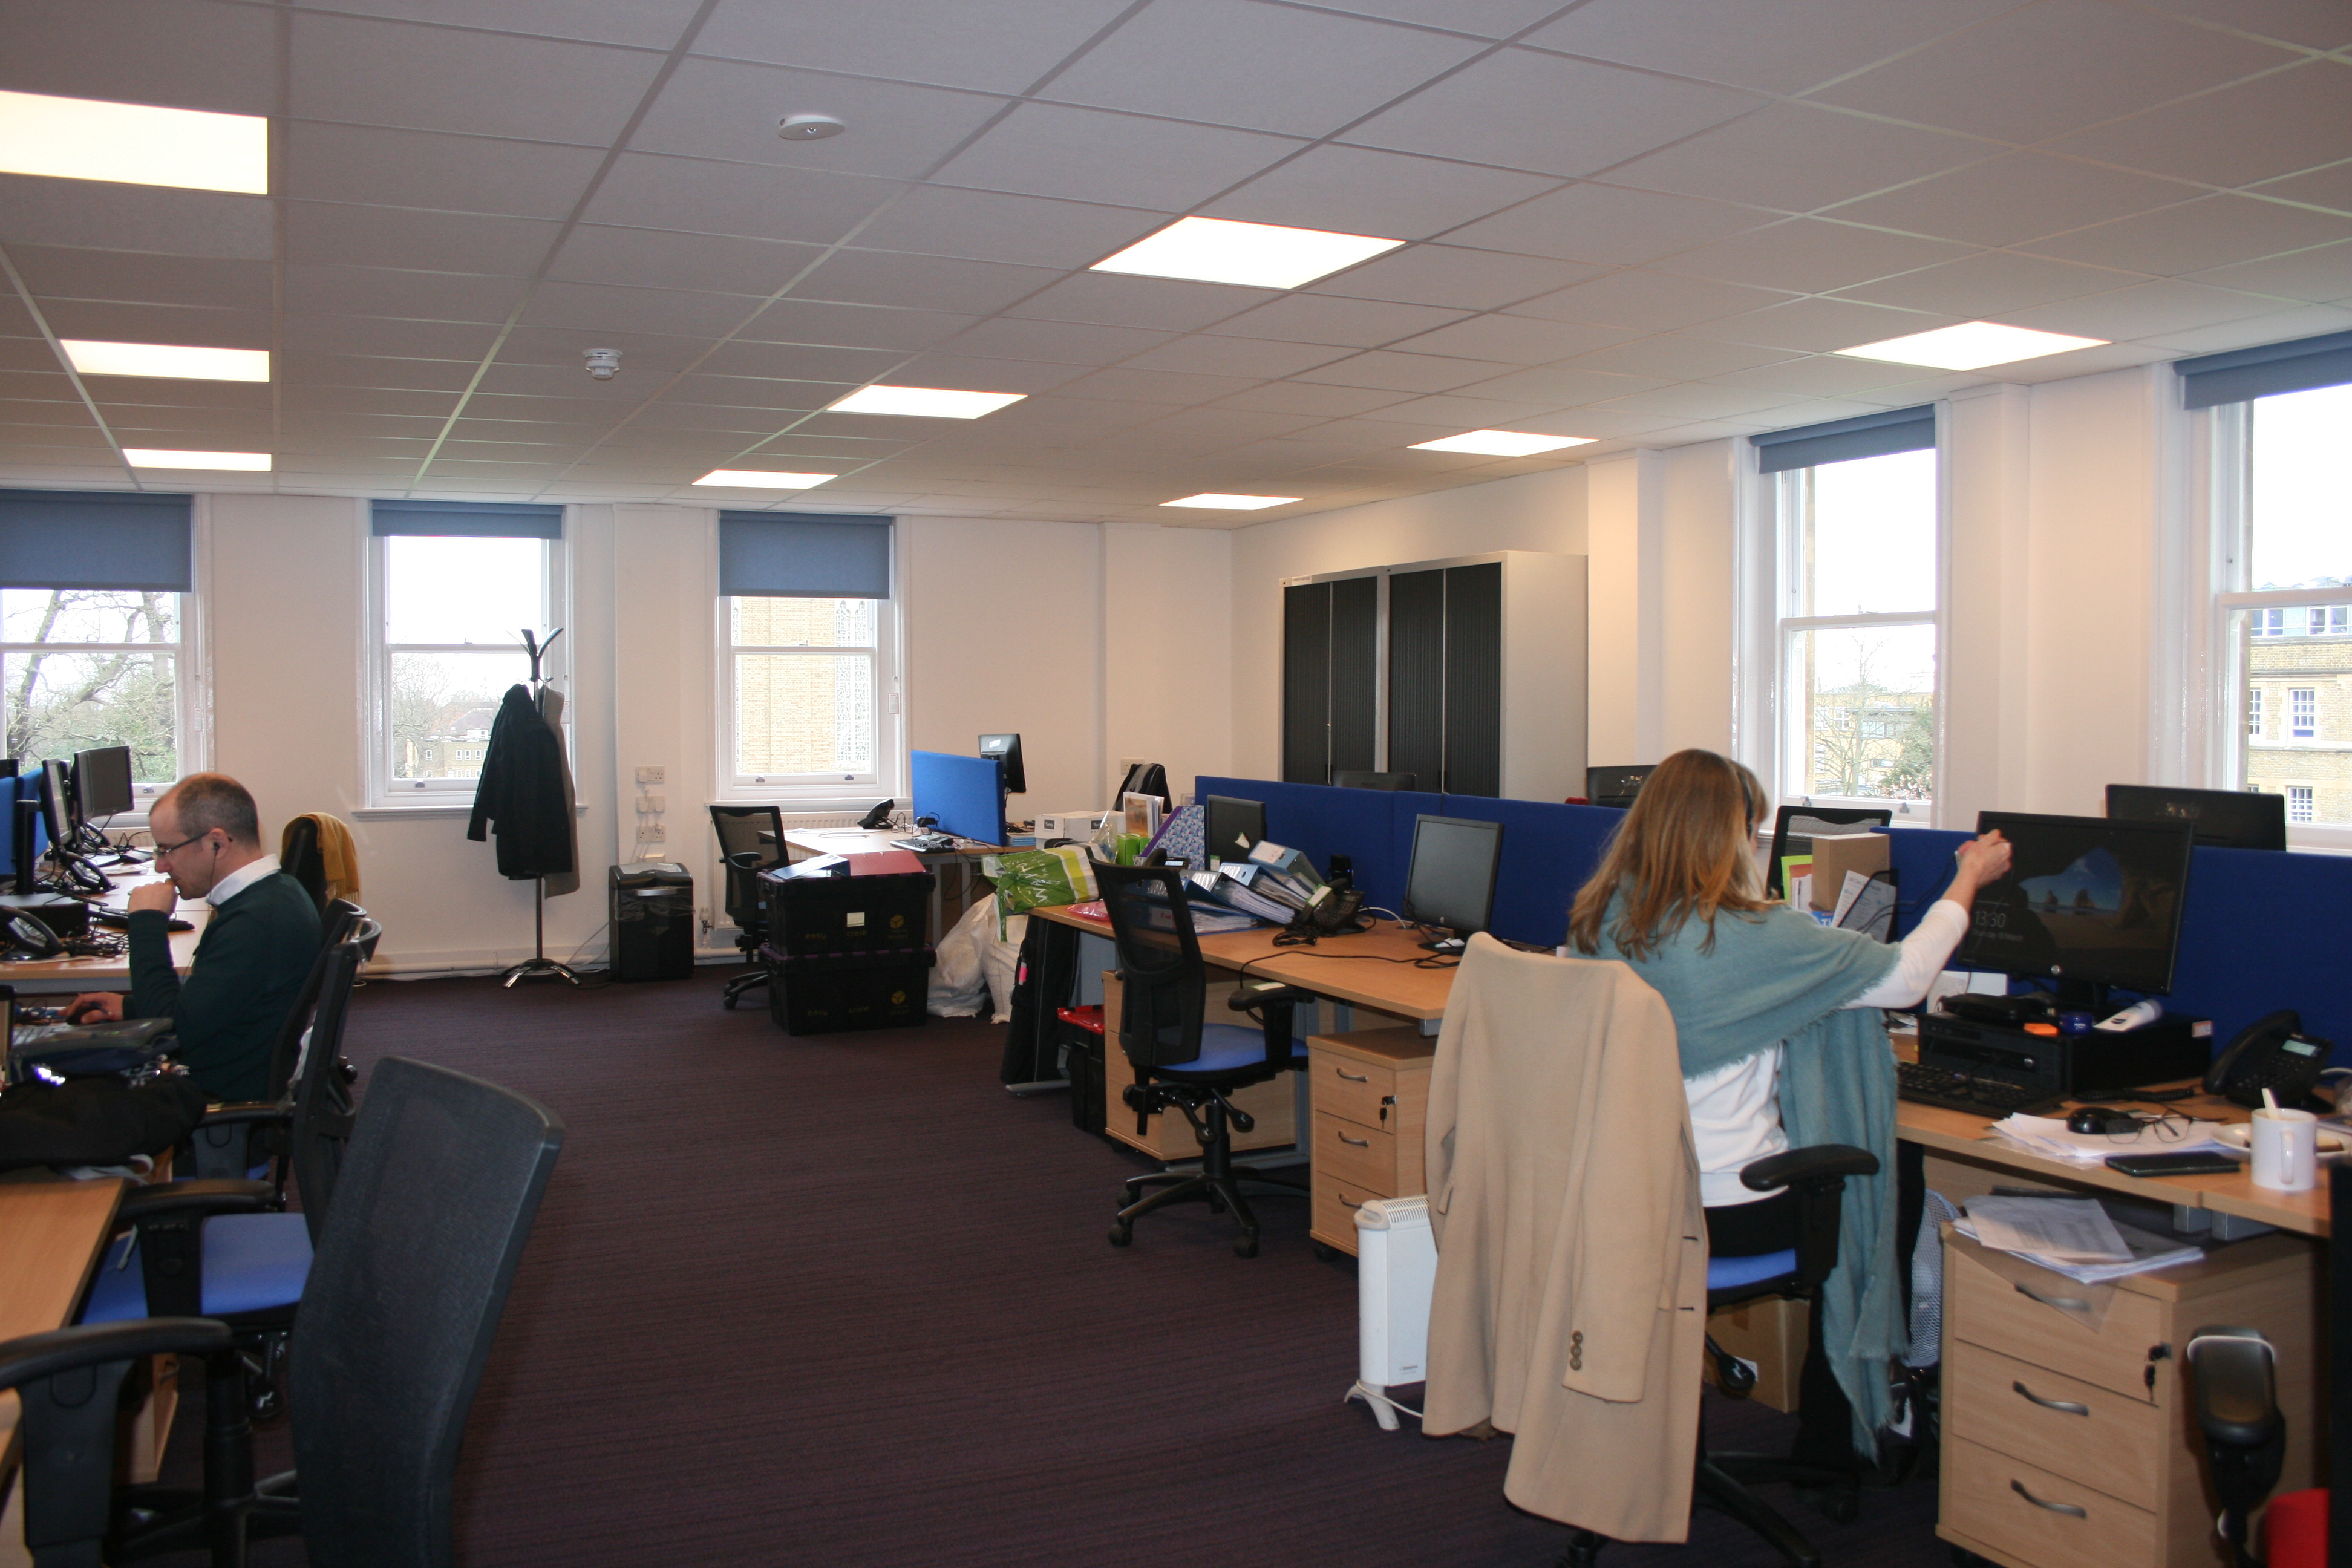 New staff offices